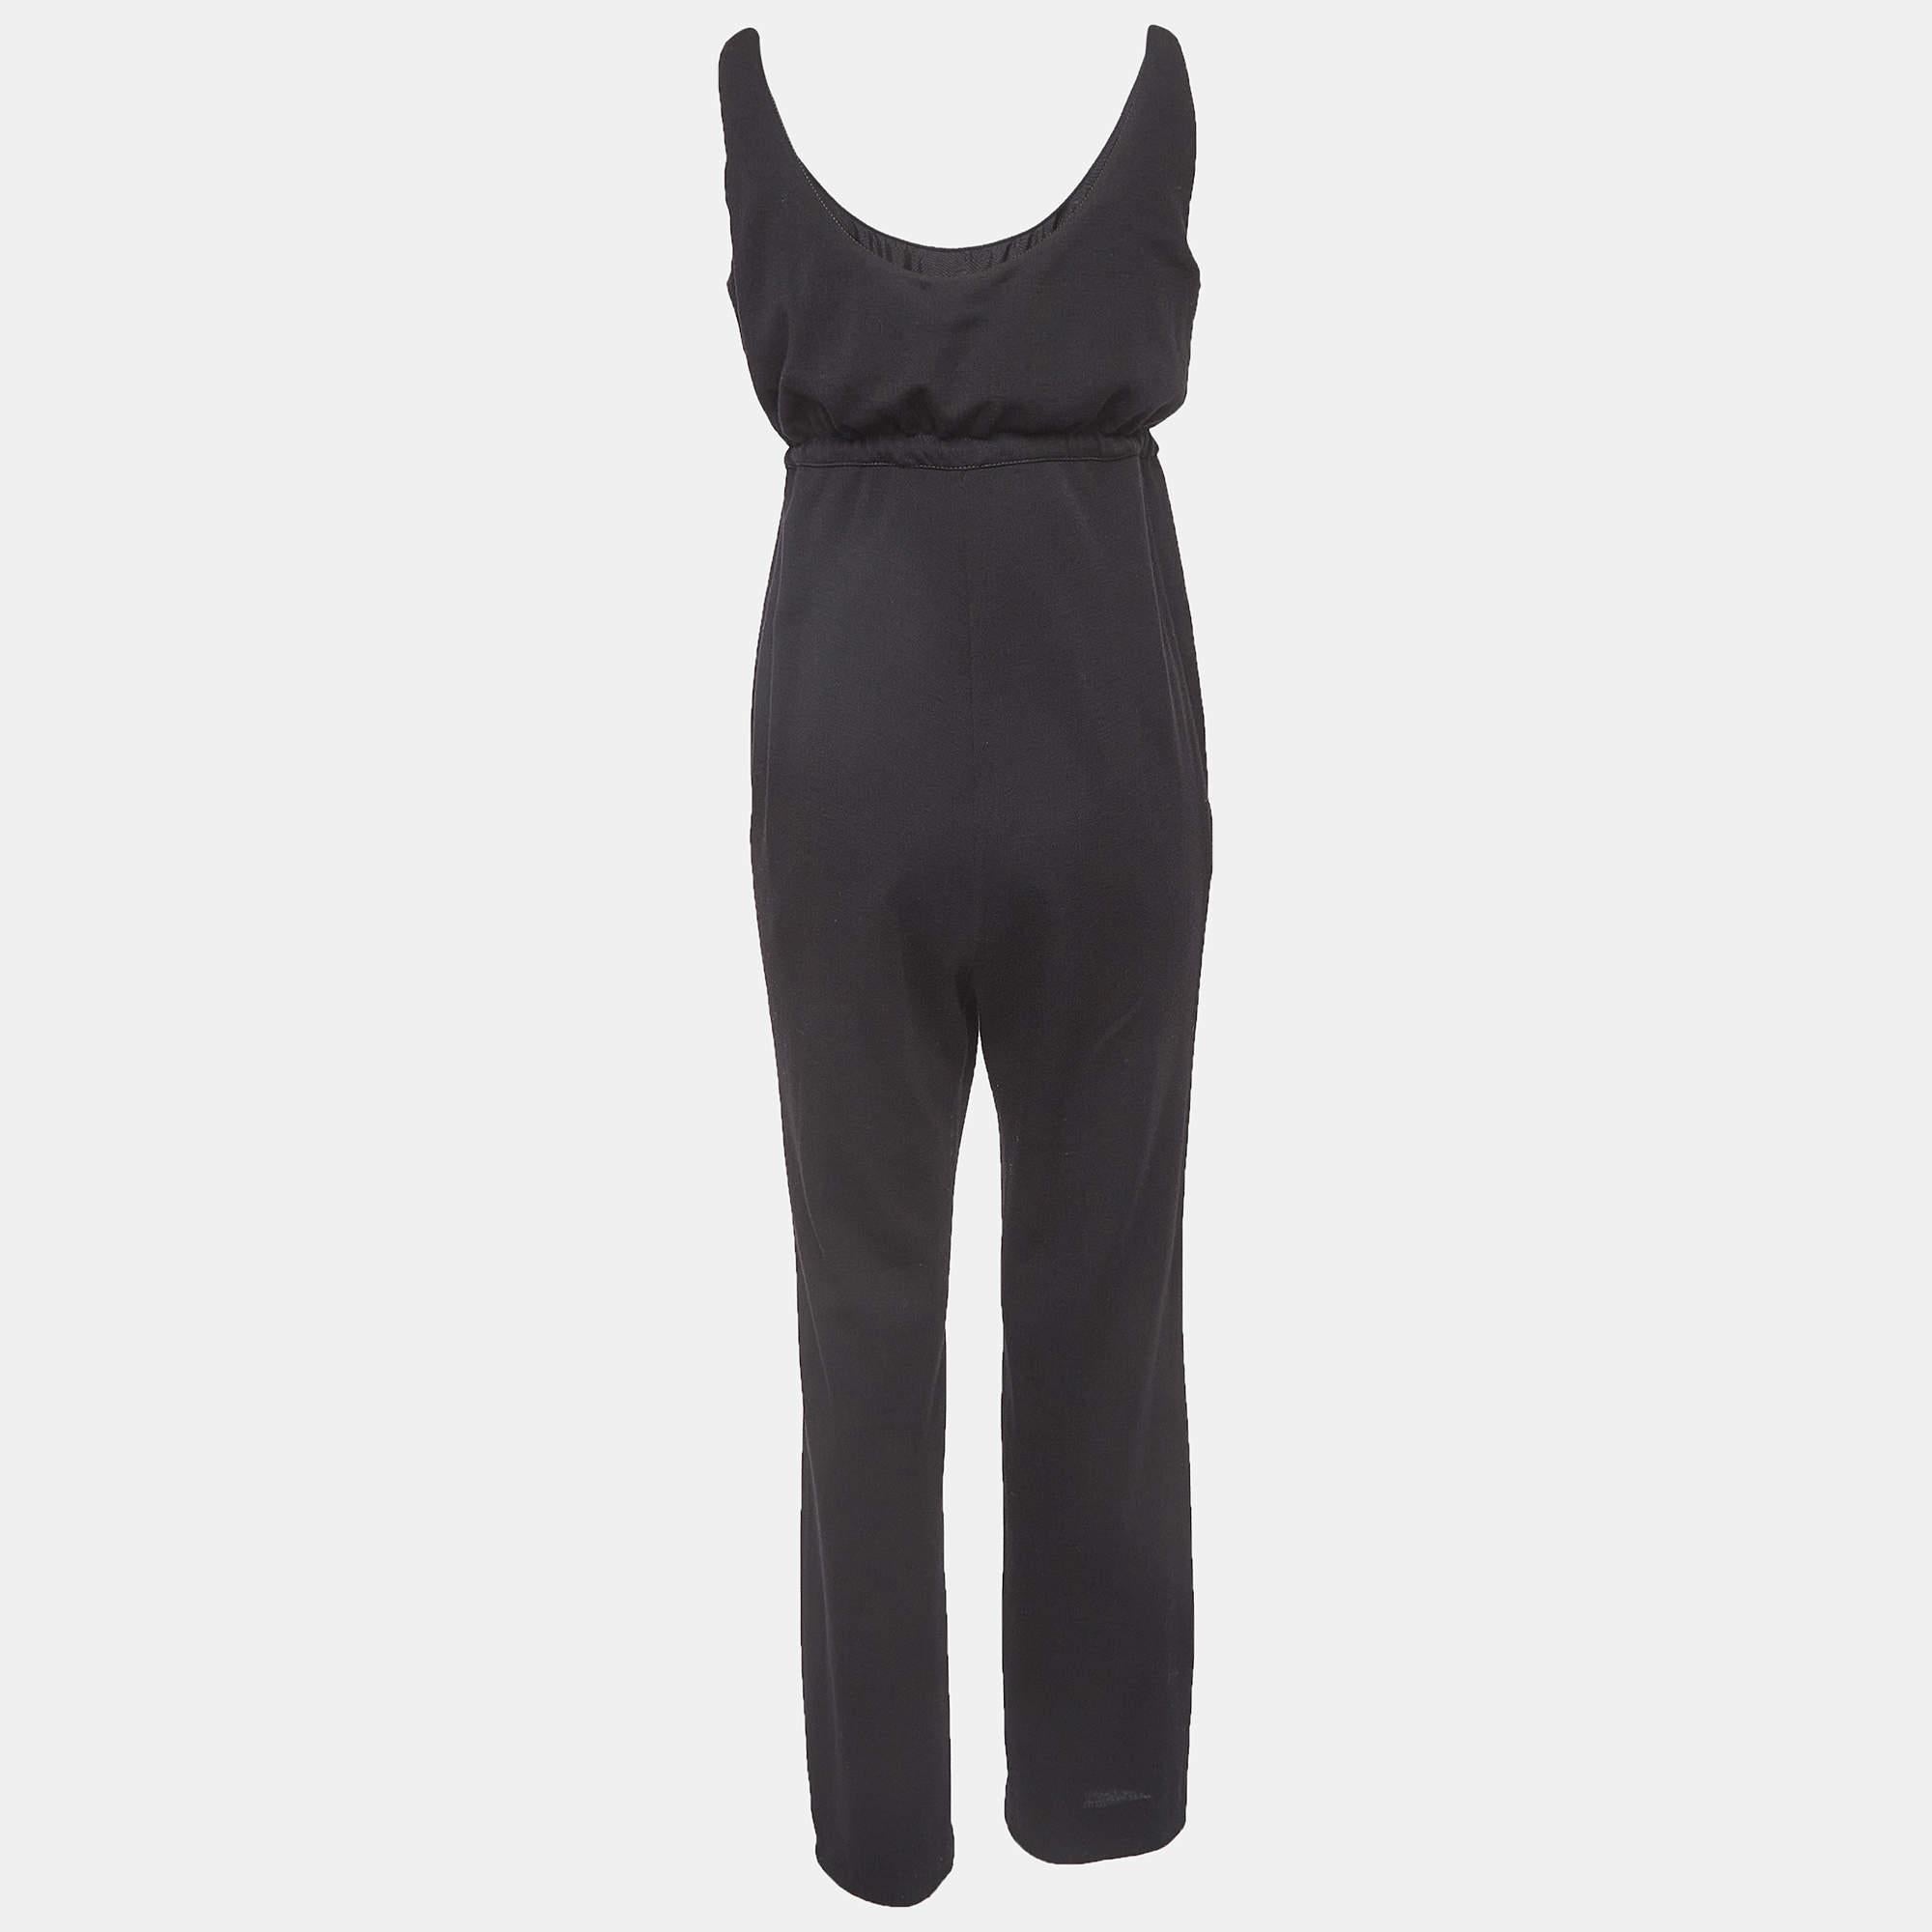 Bring in a touch of sophistication and elegance to your look by wearing this Chanel jumpsuit. A flattering neckline, classy hue, and noticeable details define this jumpsuit. Style it with high heels.

